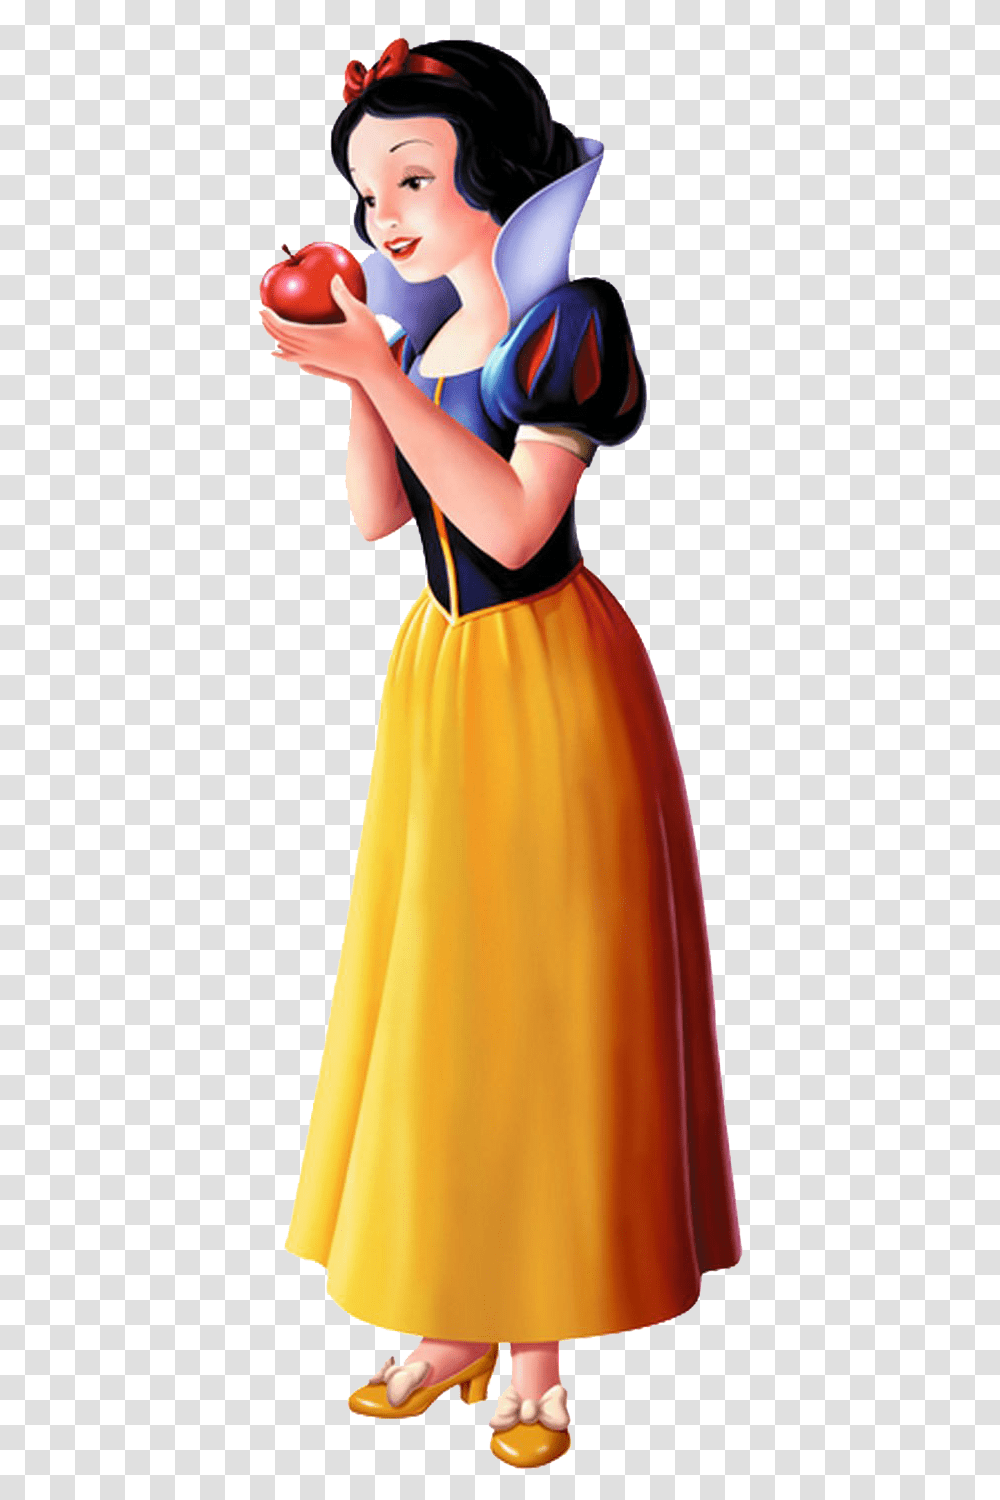 Snow White Images All Snow White With Apple, Clothing, Evening Dress, Robe, Gown Transparent Png